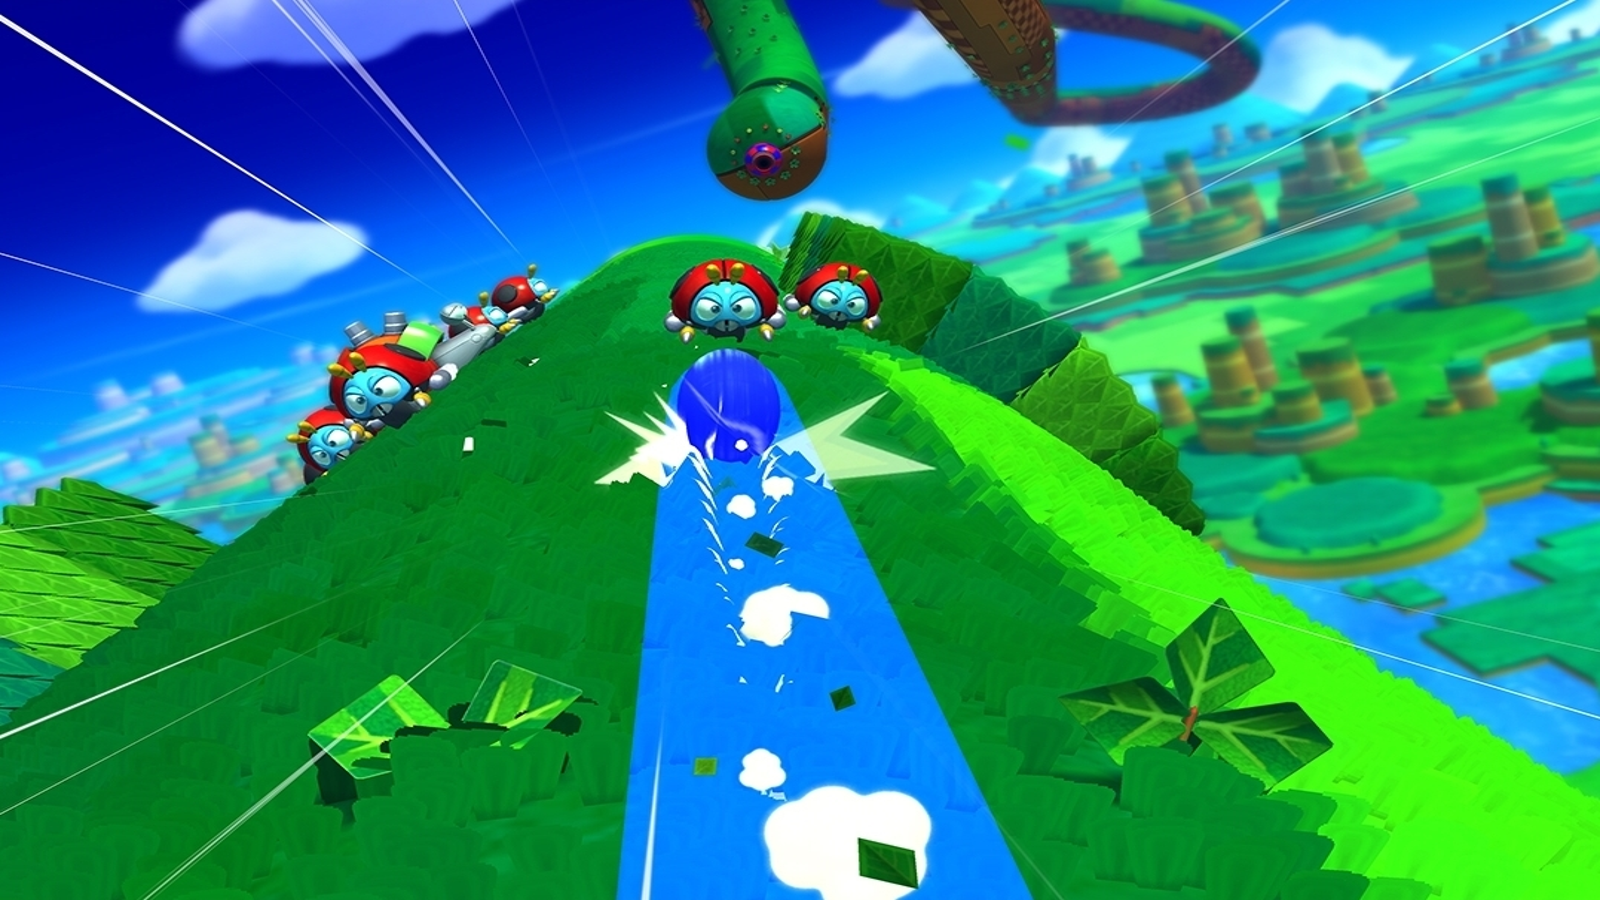 Complete - Ice Sonic Mod for Sonic Colors Wii